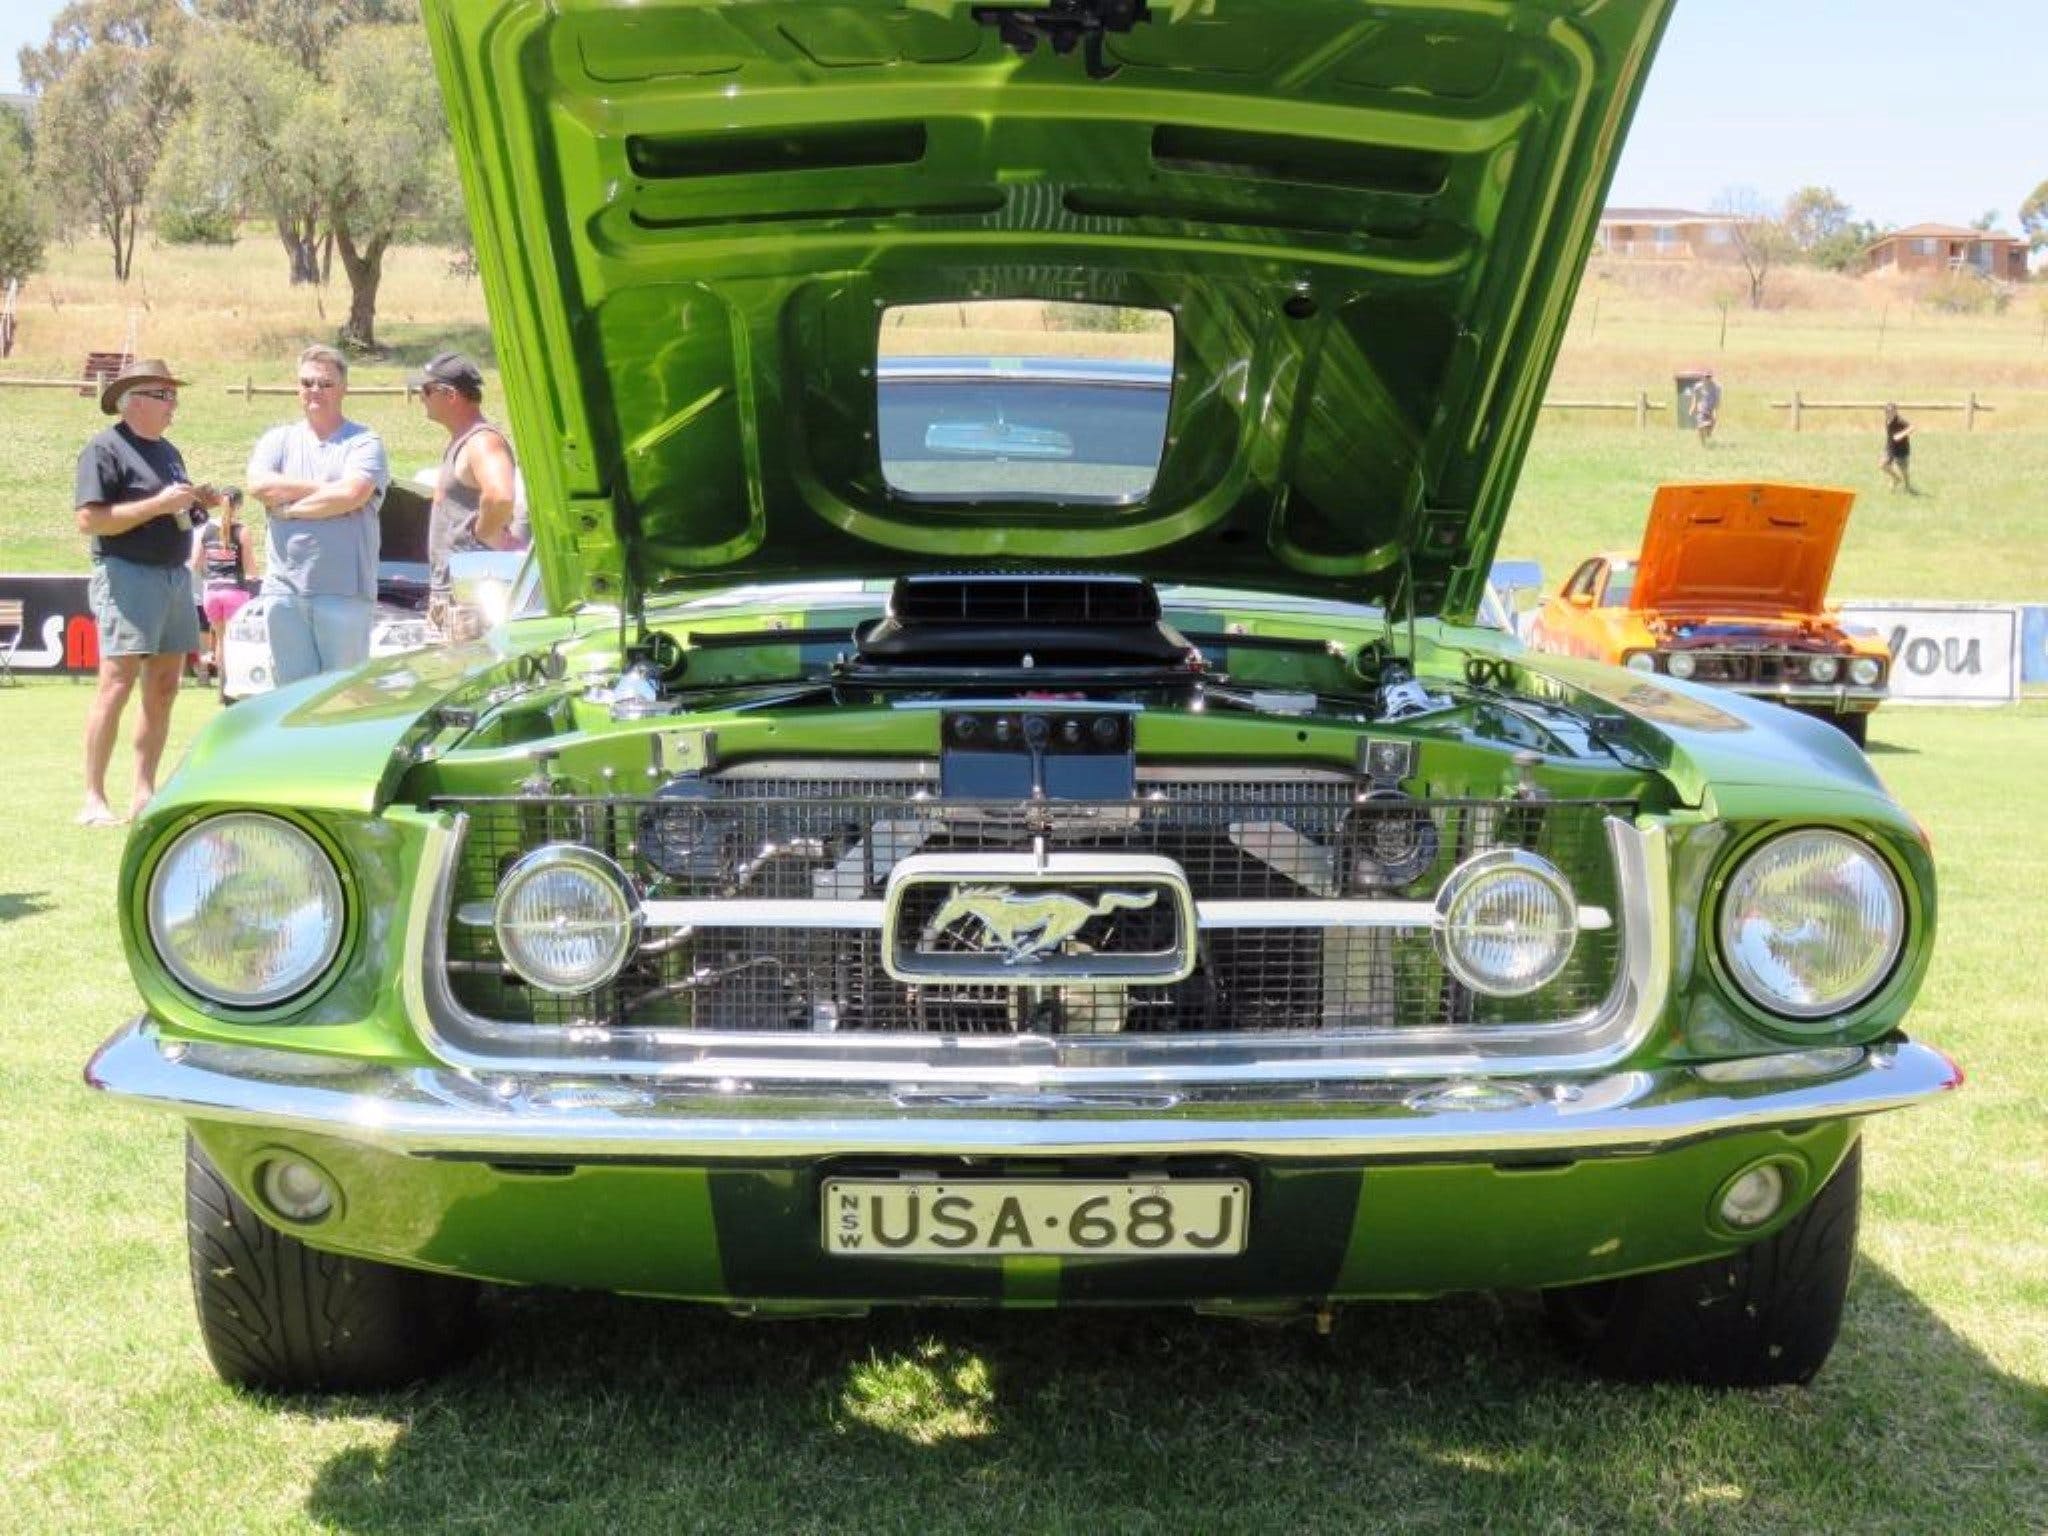 Central West Car Club Charity Show and Shine - C Tourism